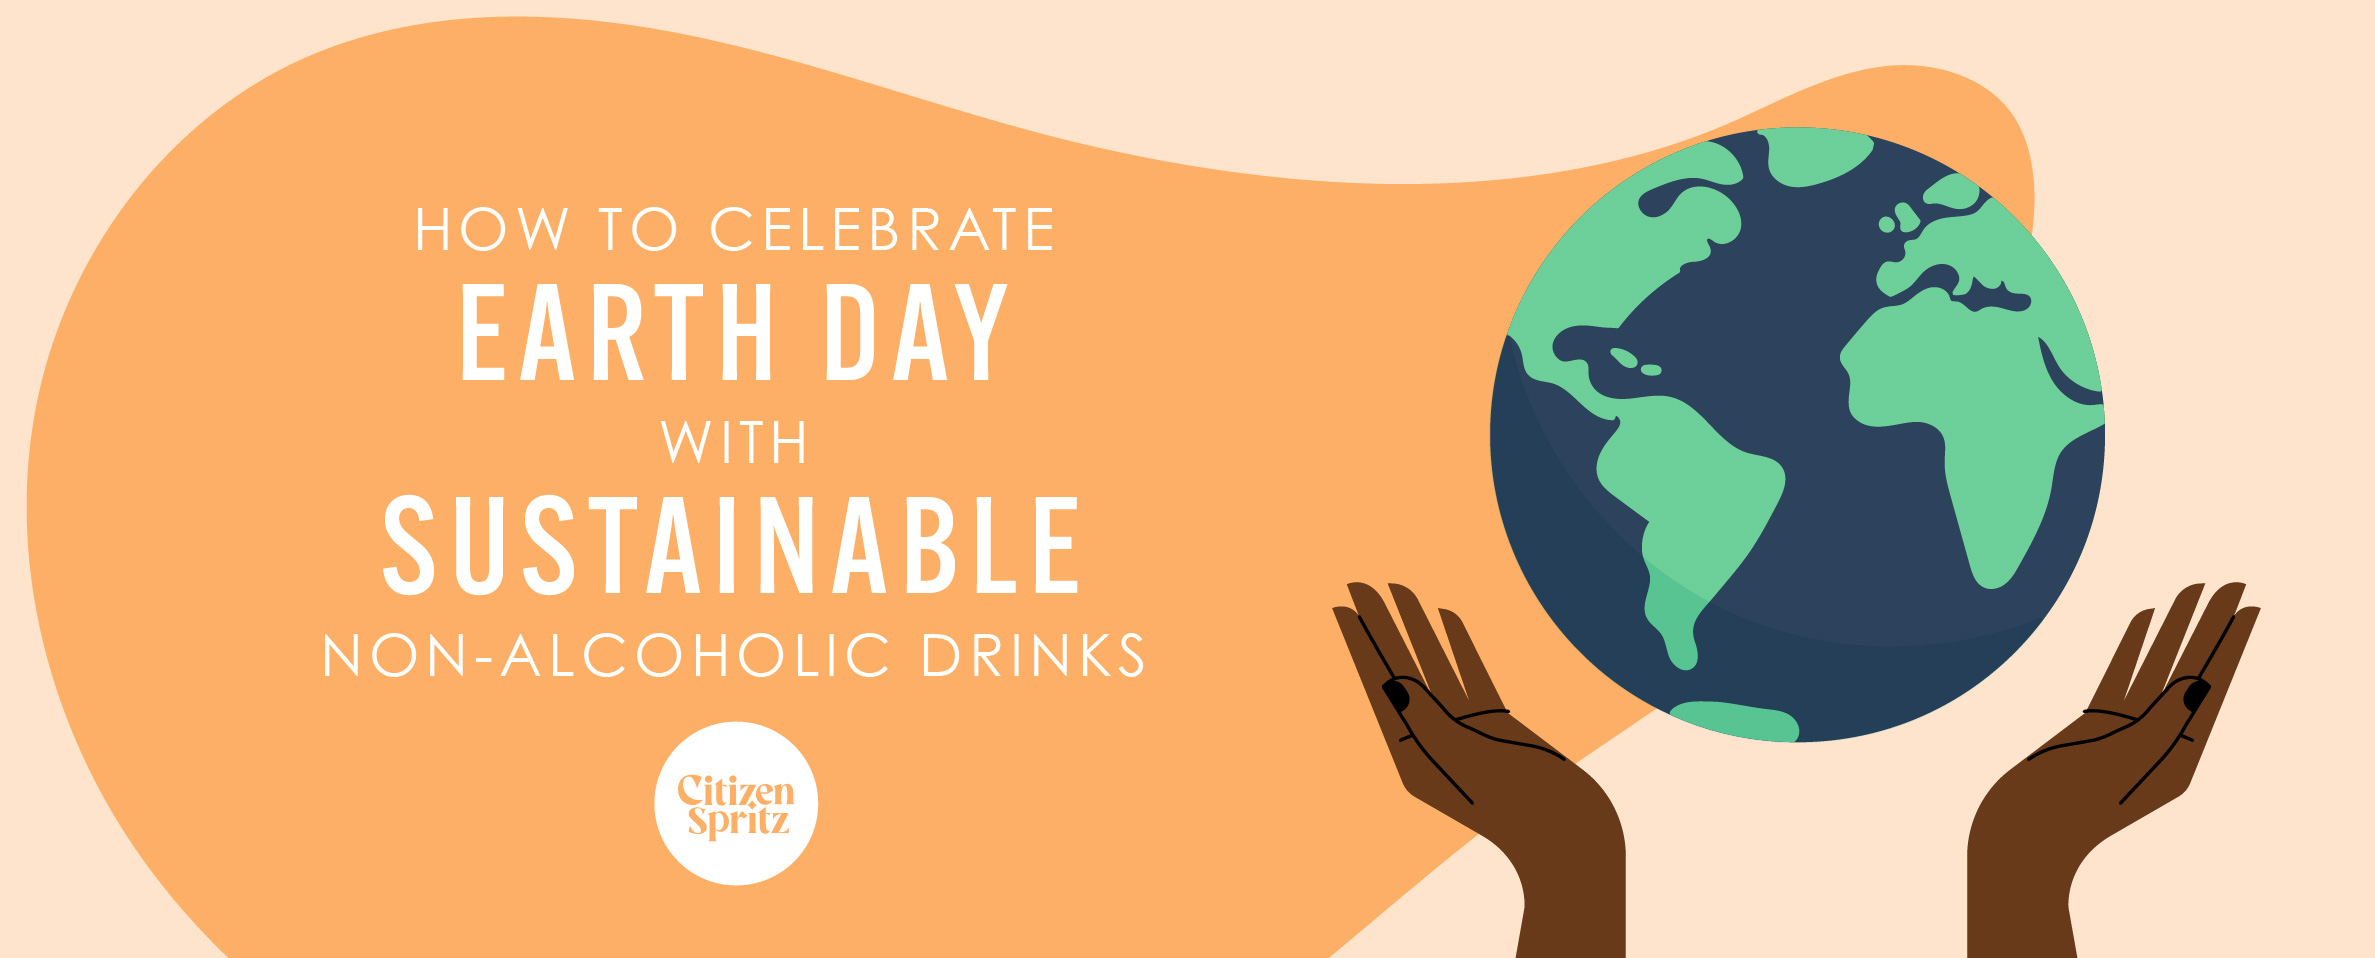 An inviting graphic featuring the Earth cradled between two hands against a warm peach background, accompanied by the text 'HOW TO CELEBRATE EARTH DAY WITH SUSTAINABLE NON-ALCOHOLIC DRINKS', promoting Citizen Spritz's commitment to sustainability and mindful celebration.